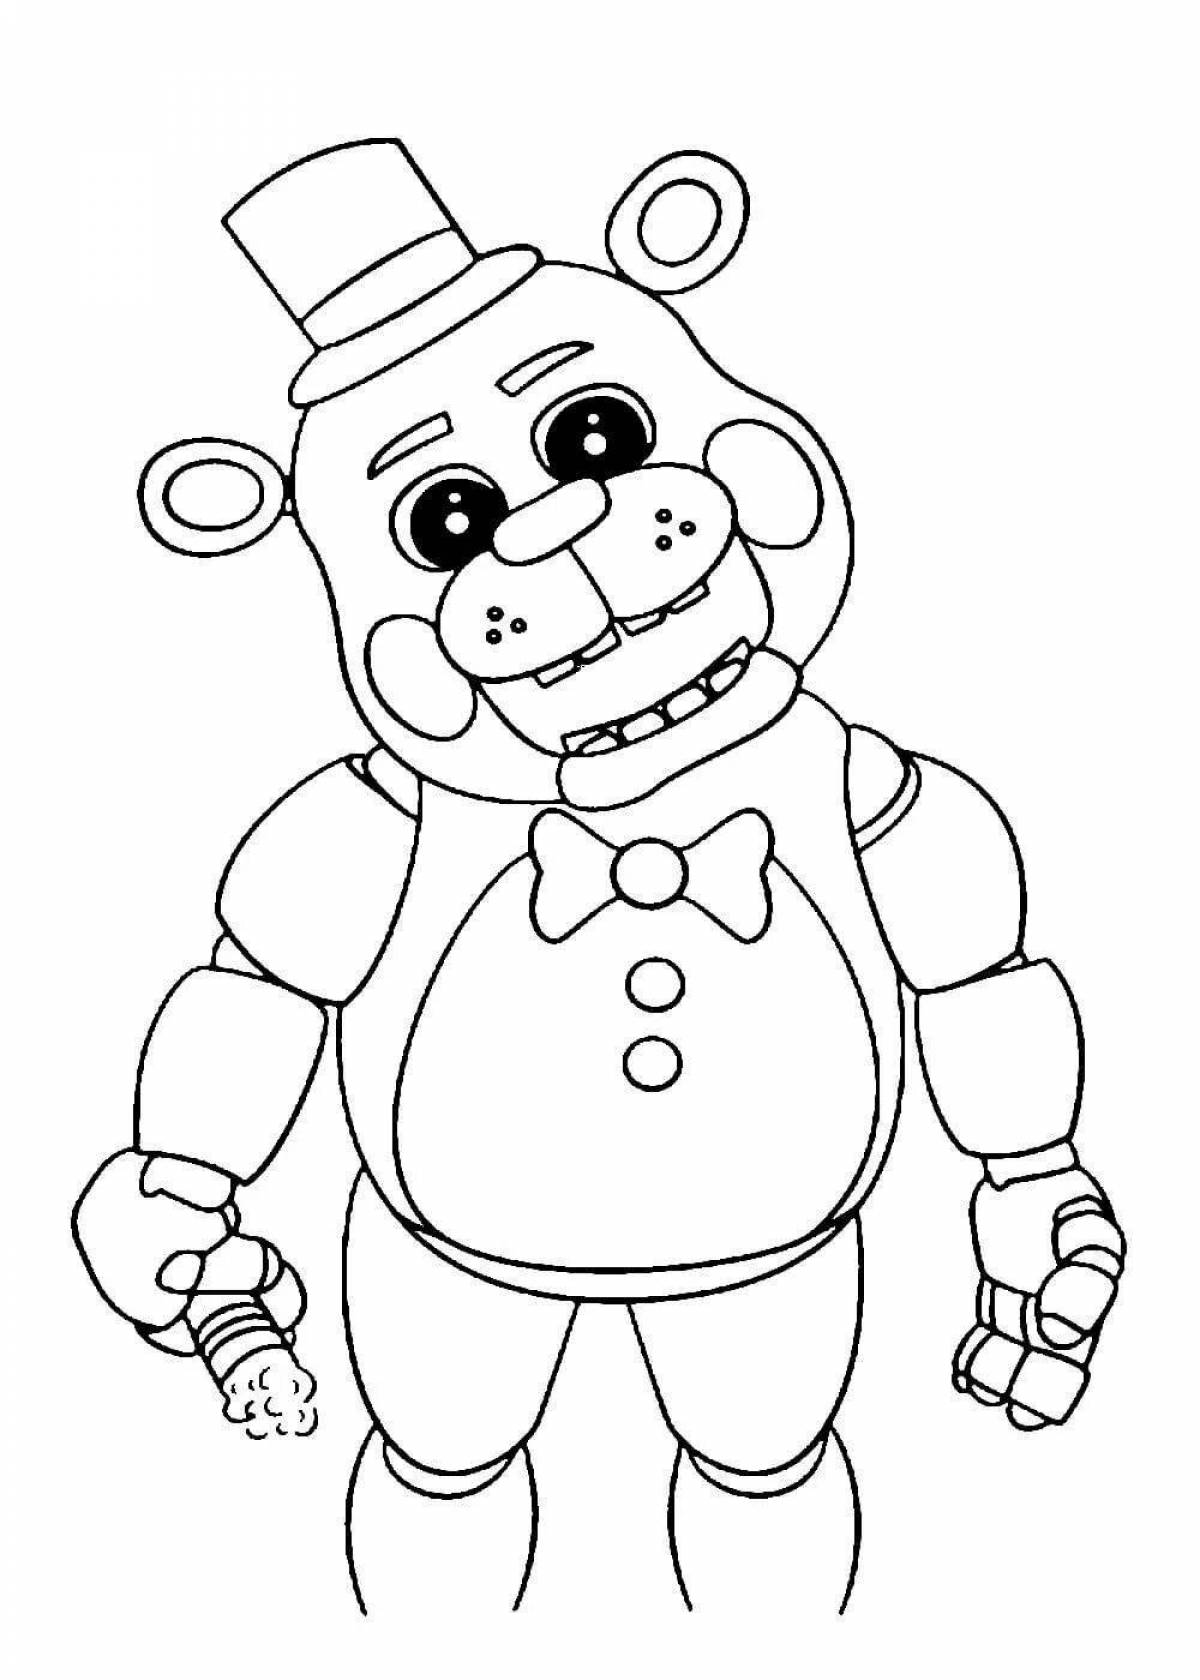 Intriguing animatronic coloring book for boys